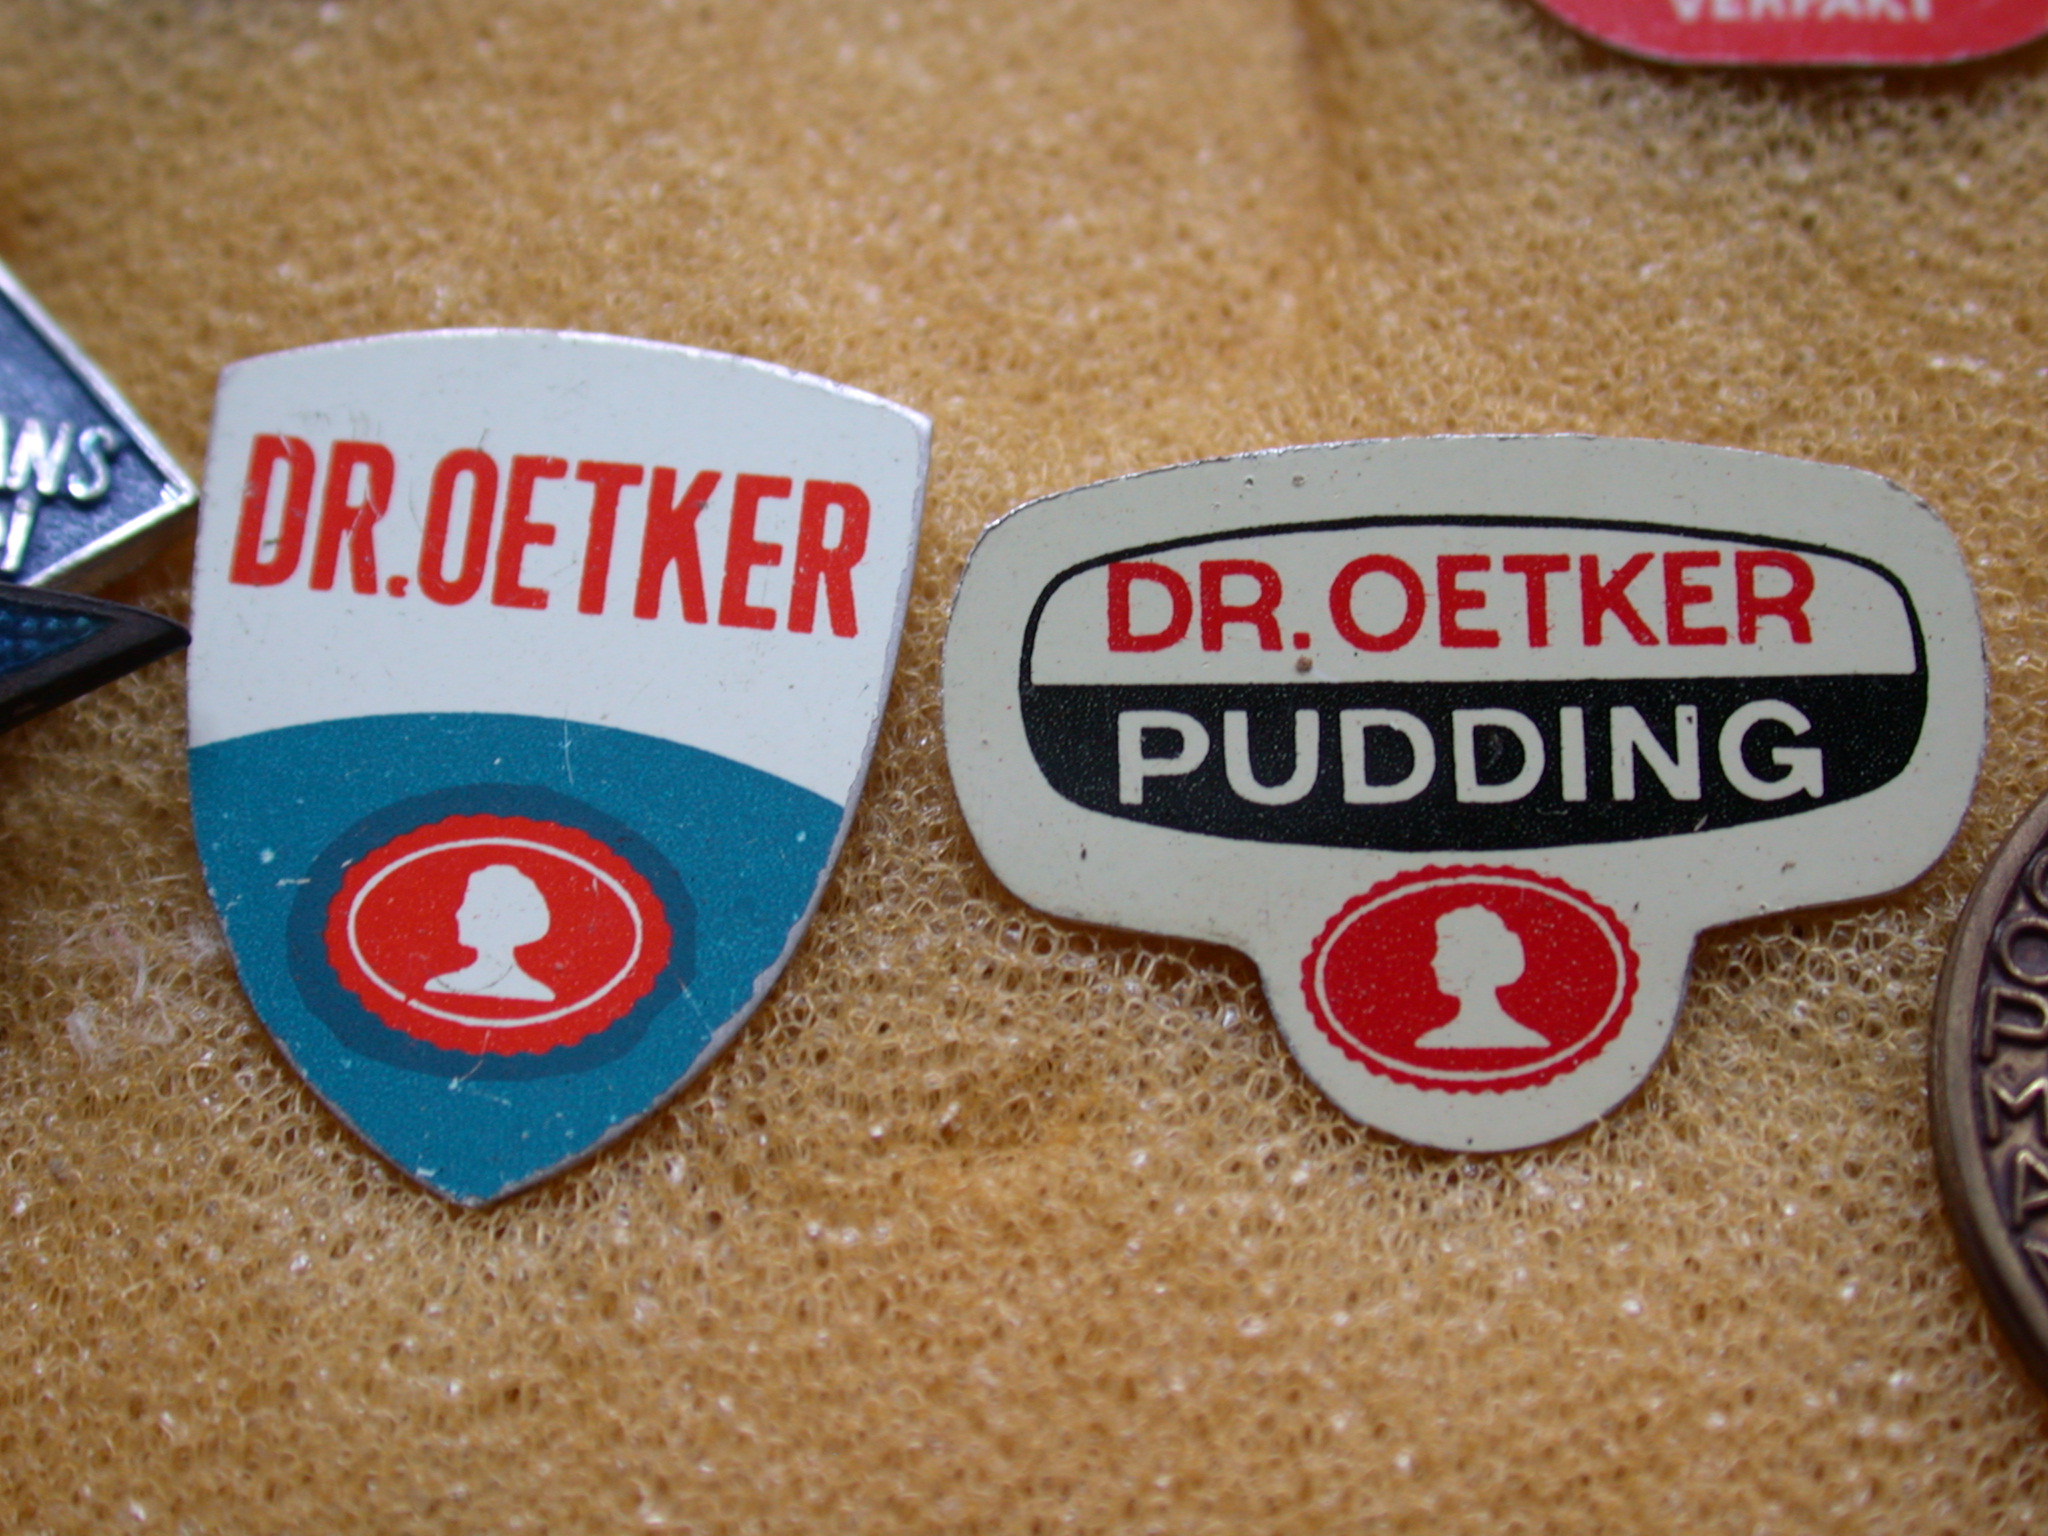 objects metal button signs pin buttons pins logo droetker oetker pudding humanoid woman illustration typo tyopgraphy sansserif hires